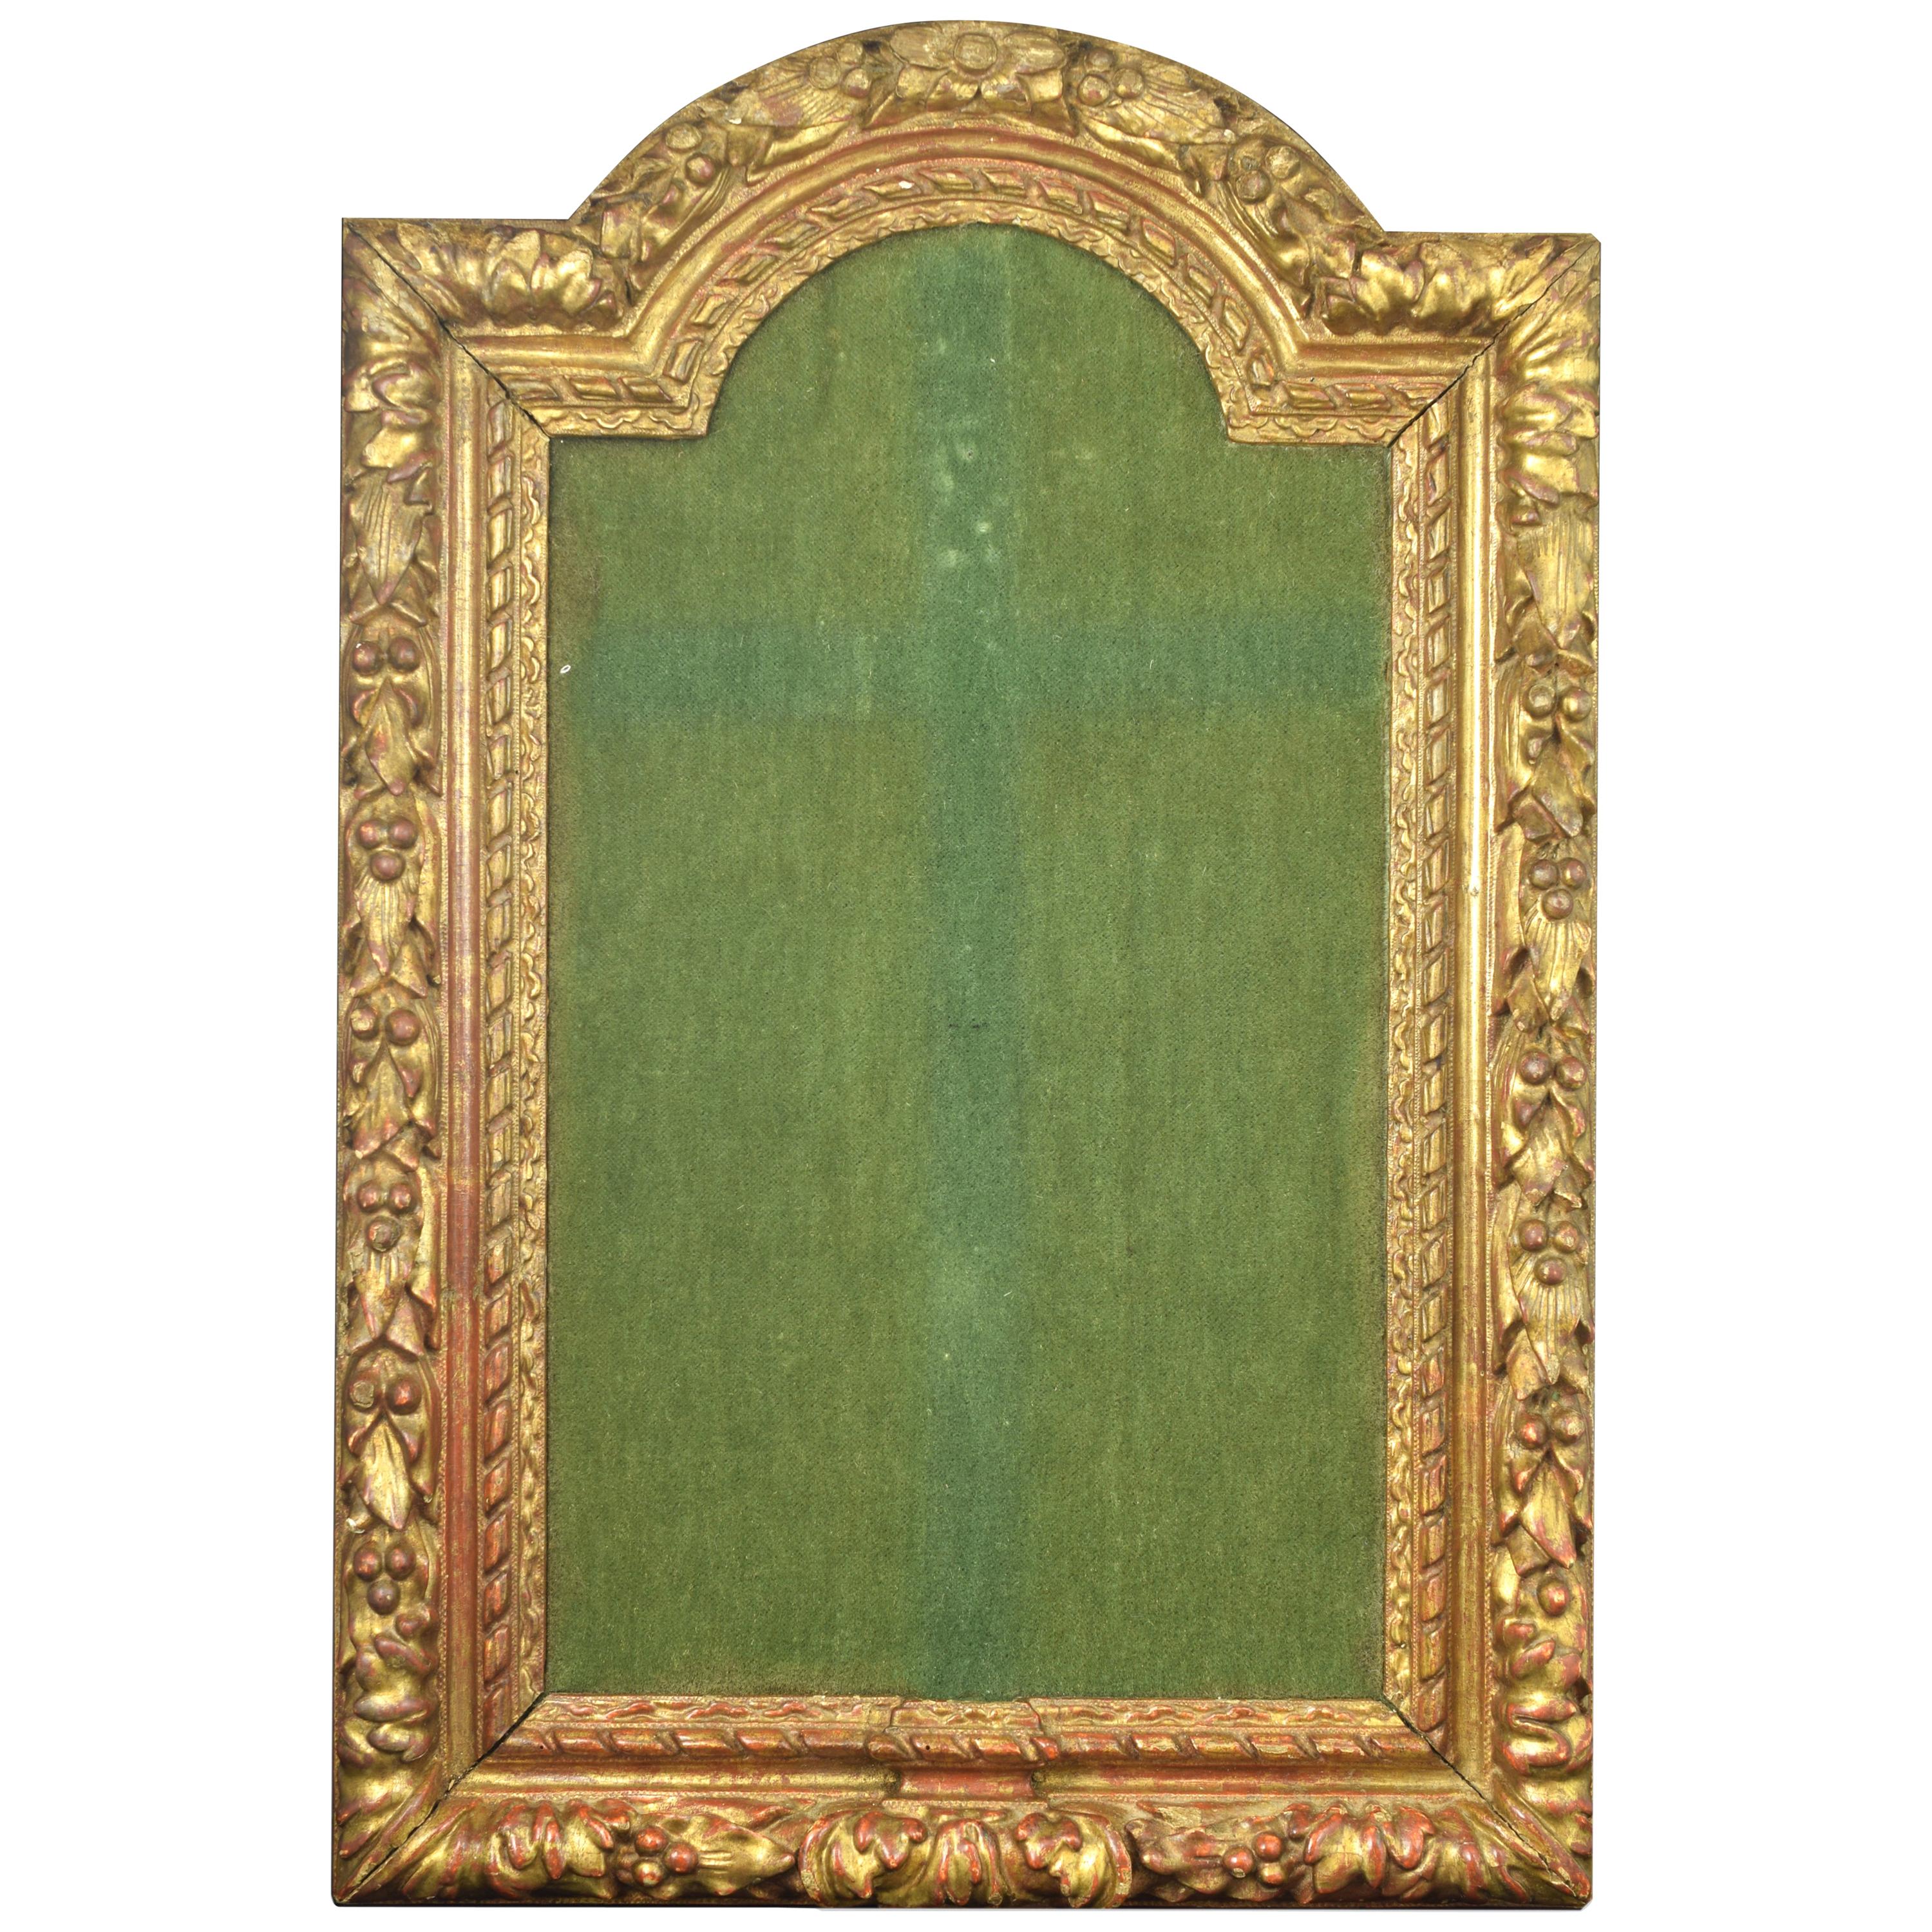 Carved and Gilded Wood Frame, 18th Century